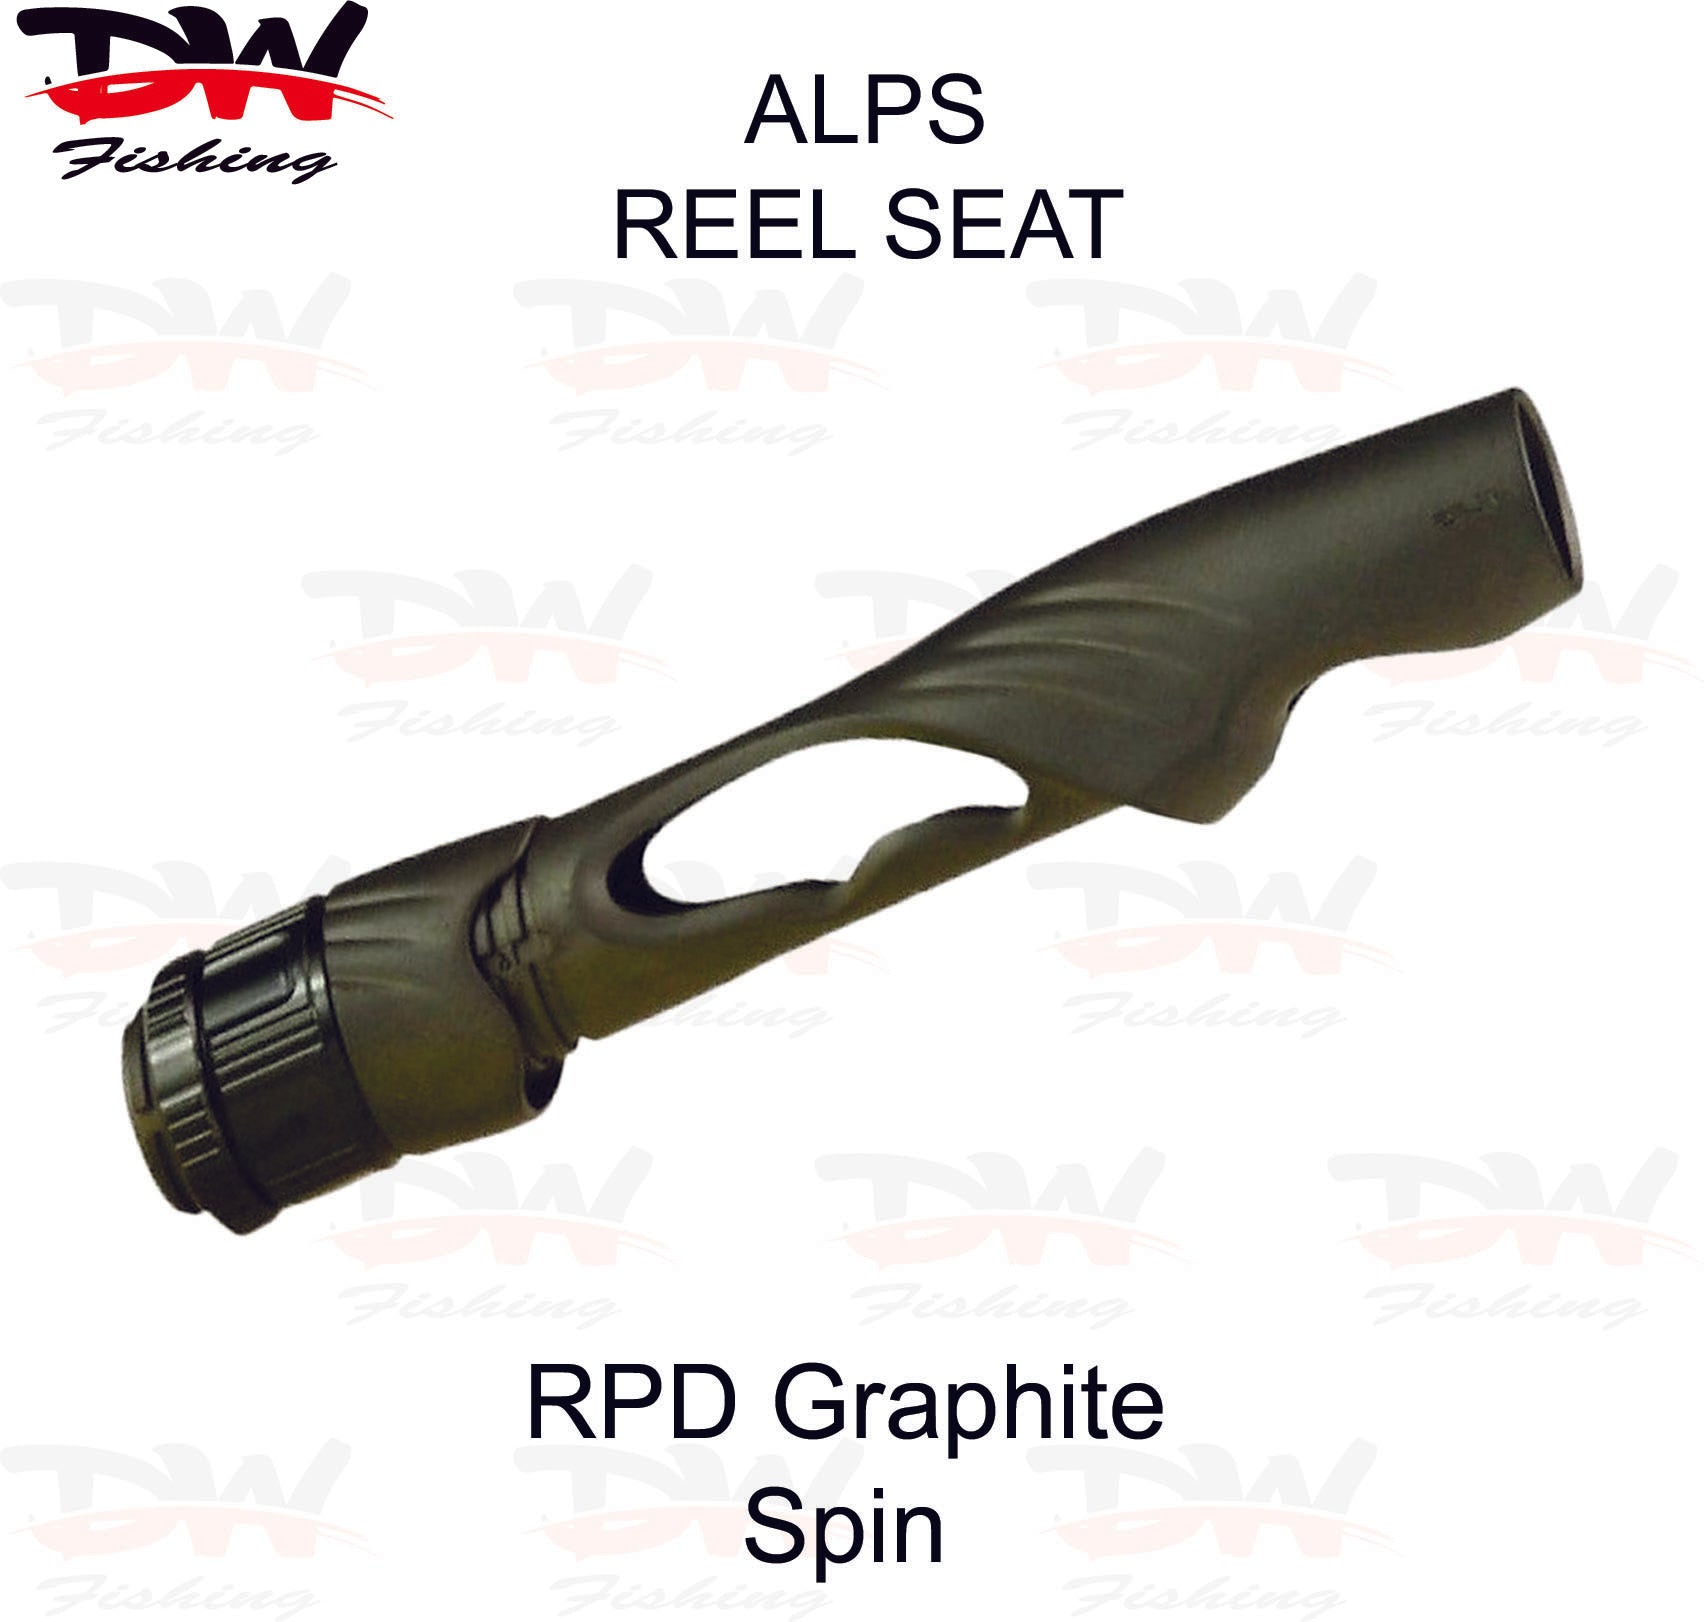 ALPS Exposed Blank Graphite Reel Seat Spin